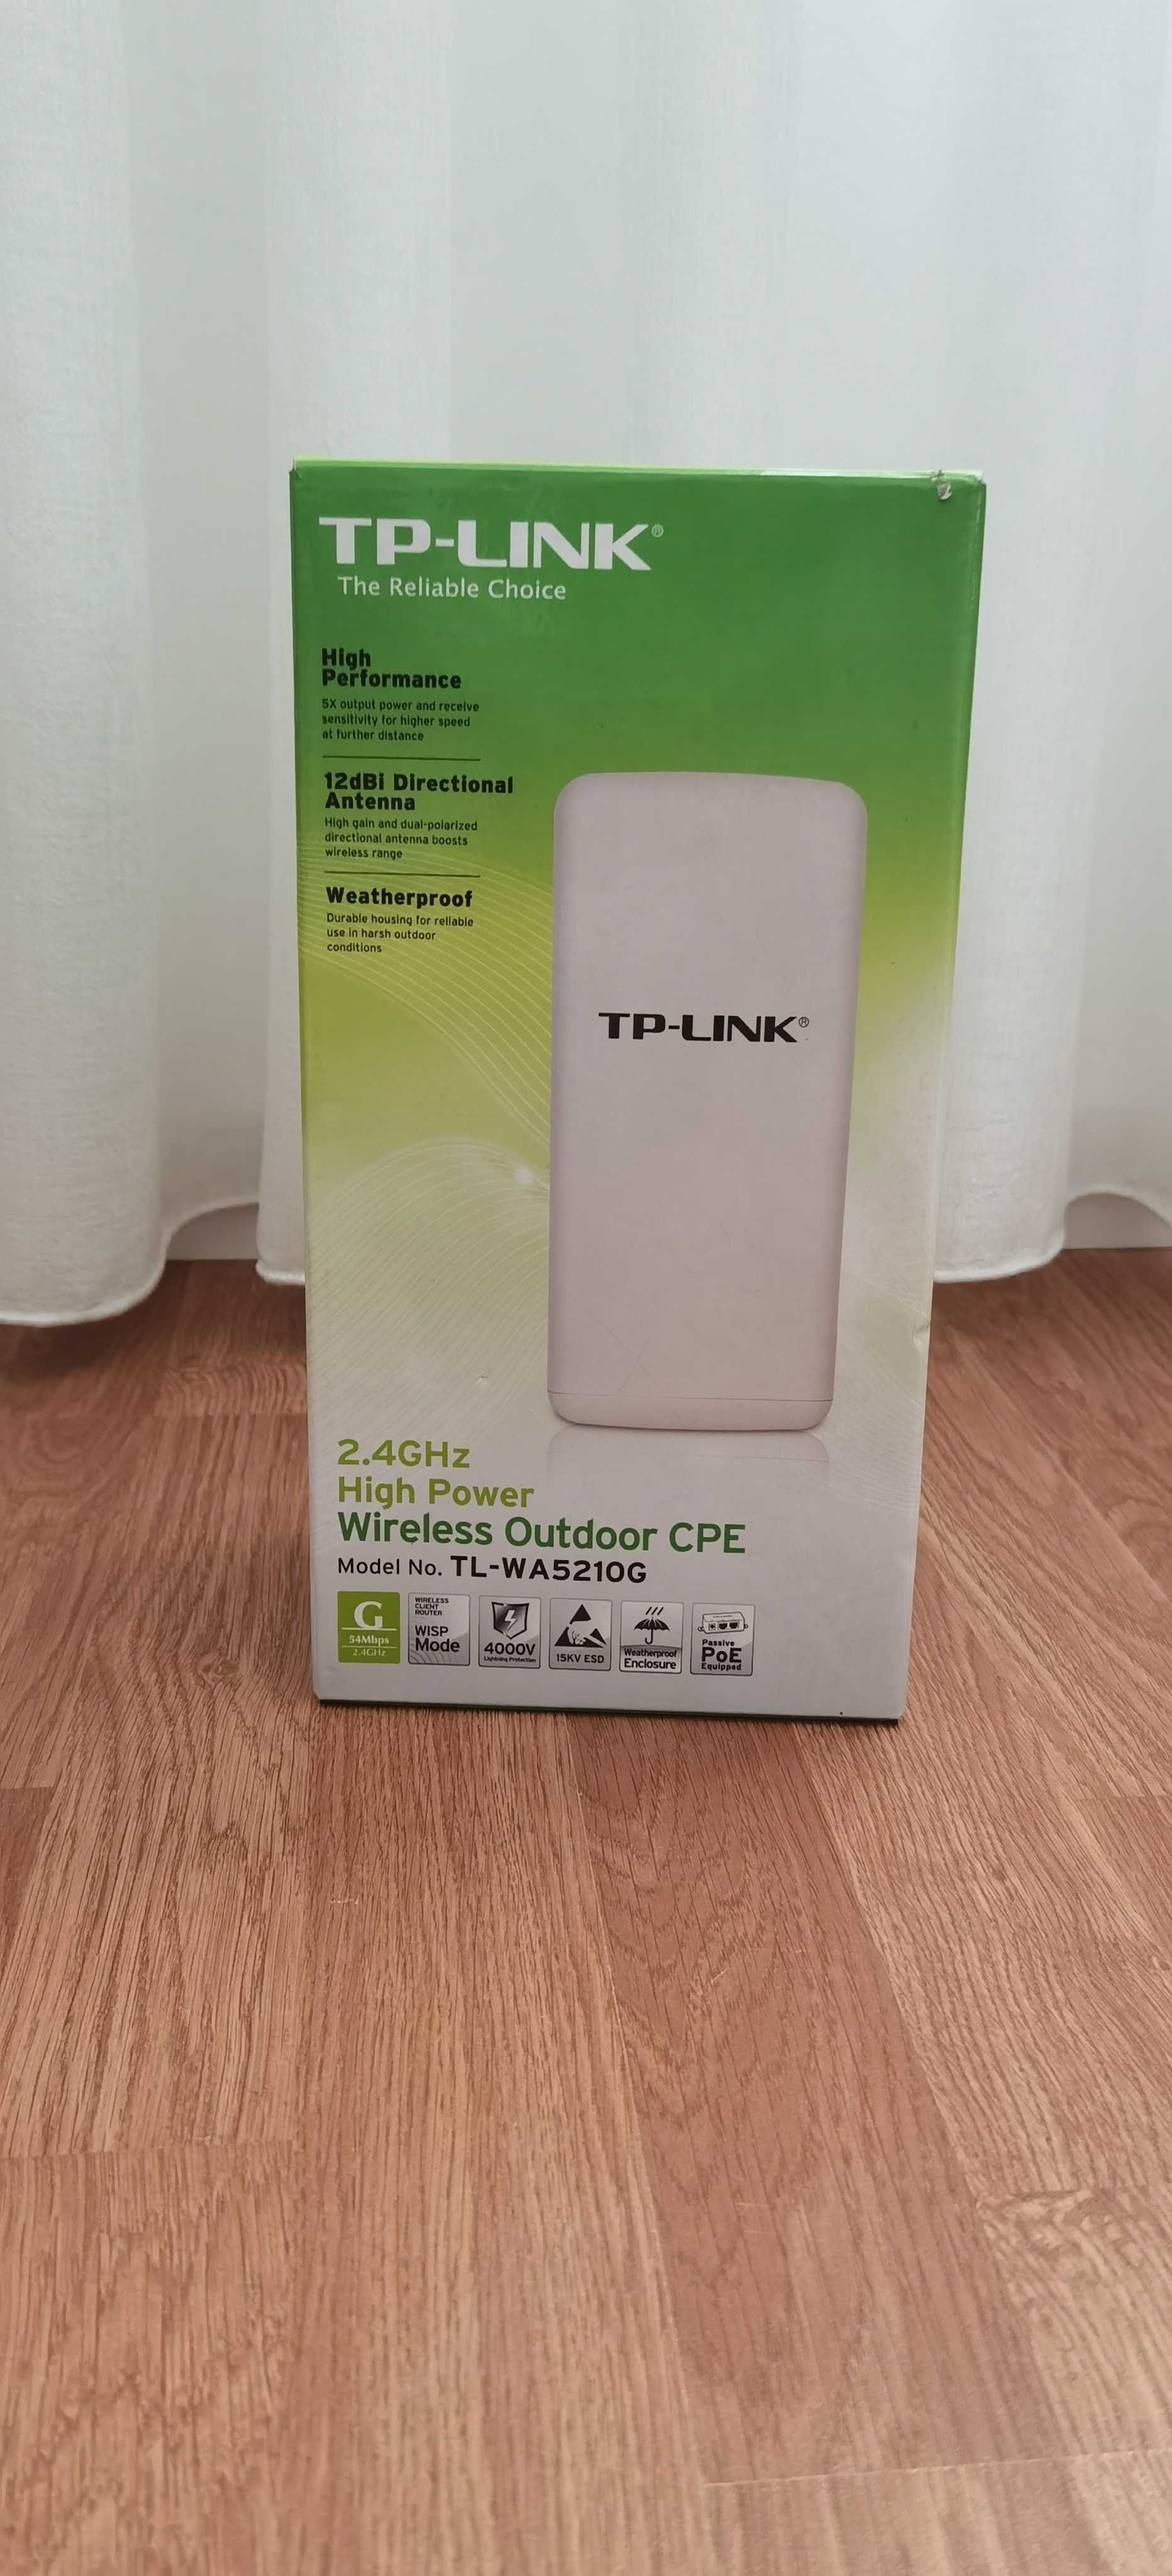 TAP-LINK wireless outdoor cpe